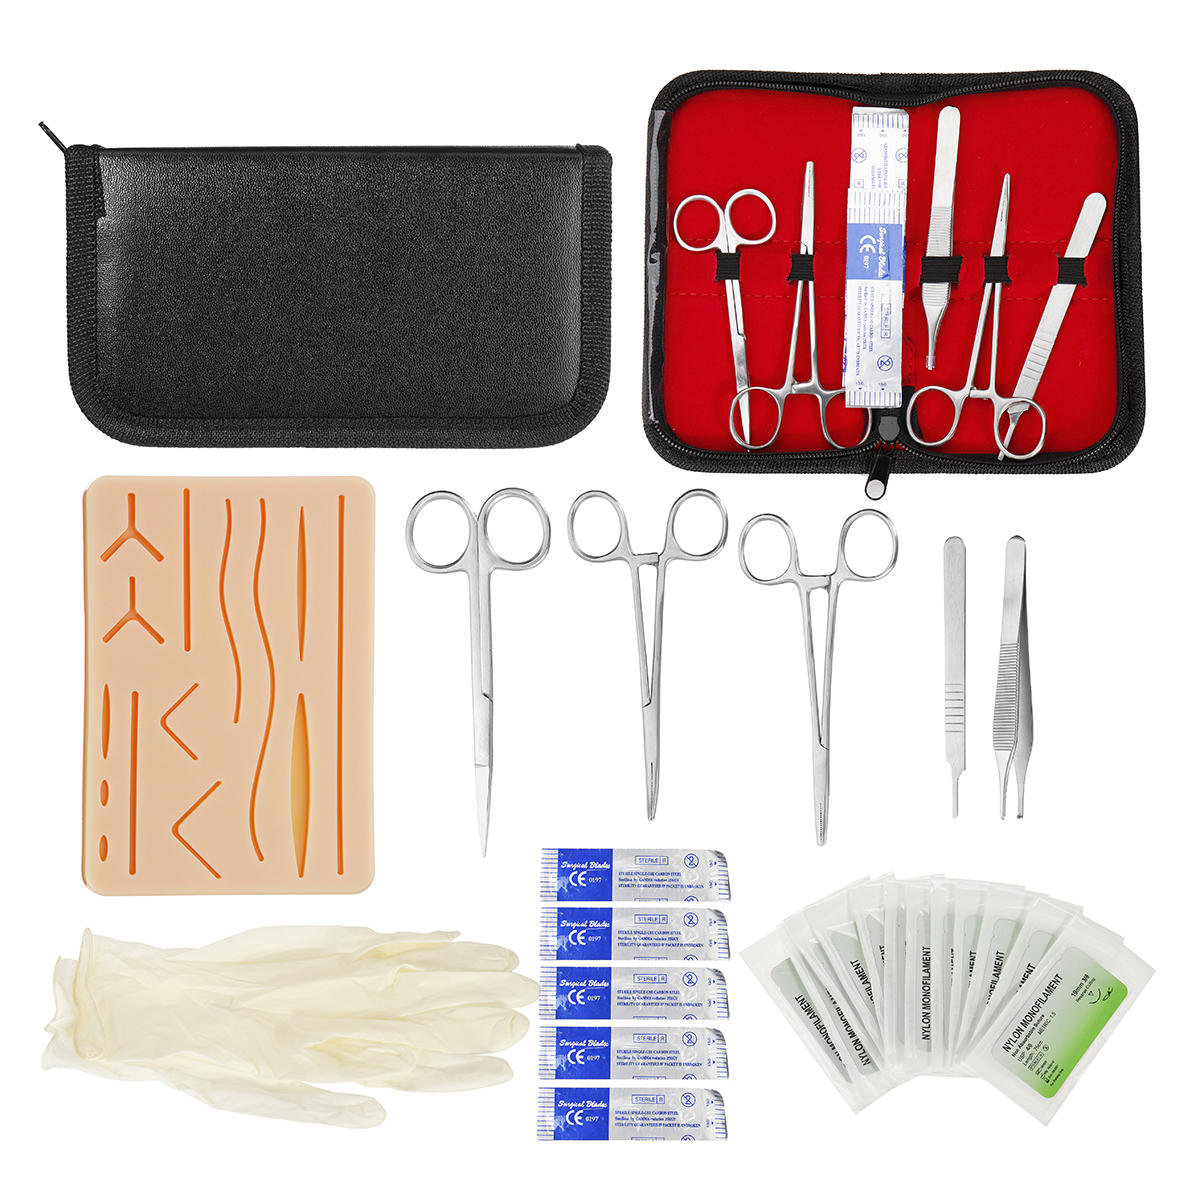 Image of 25 In 1 Skin Suture Surgical Training Kit Silicone Pad Needle Scissors Tools Kit